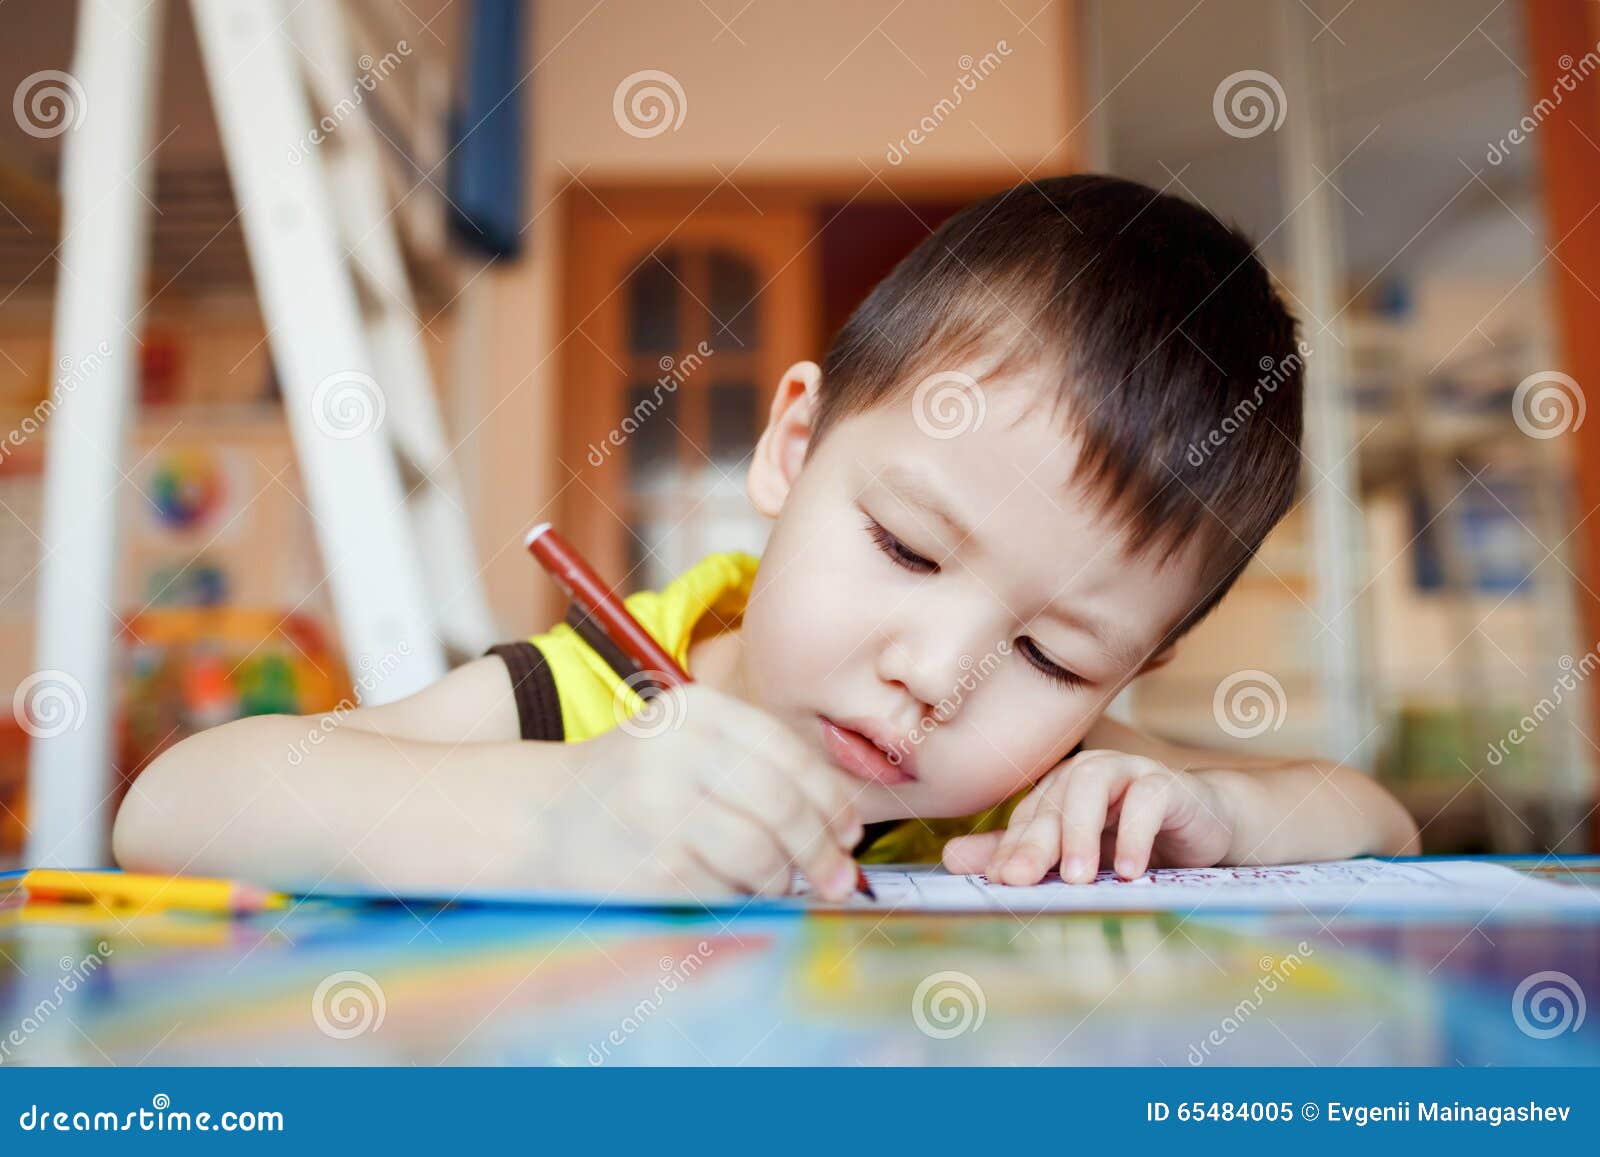 the boy carefully and intently draws in a special